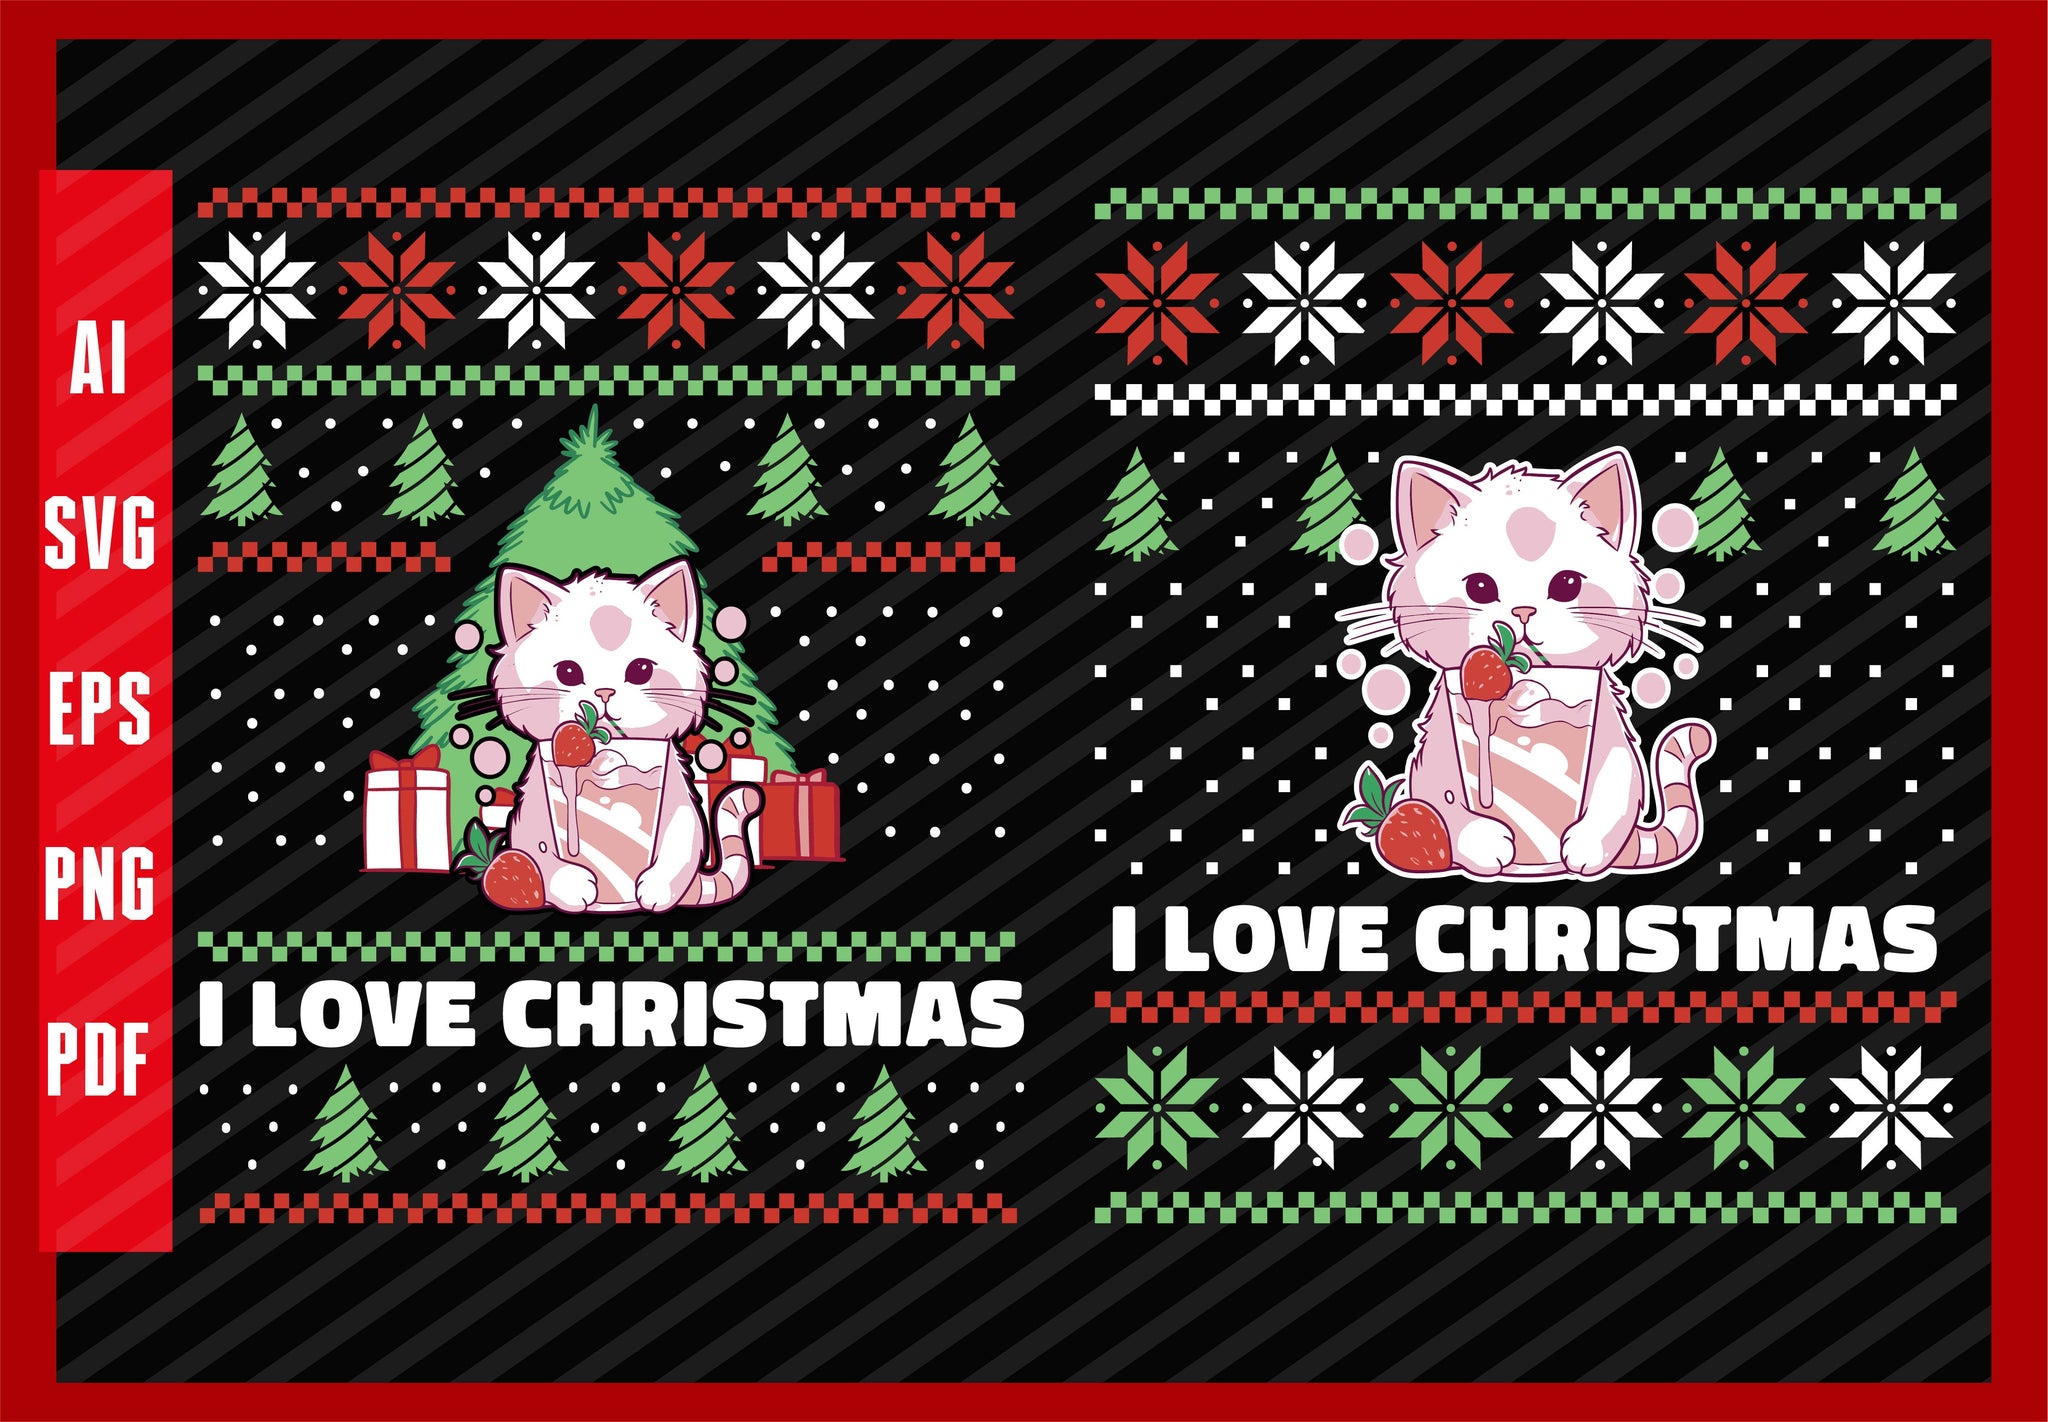 Cat Eating Strawberries Funny Pet and Drinking Food Lover Design, I Love Christmas T-Shirt Design Eps, Ai, Png, Svg and Pdf Printable Files